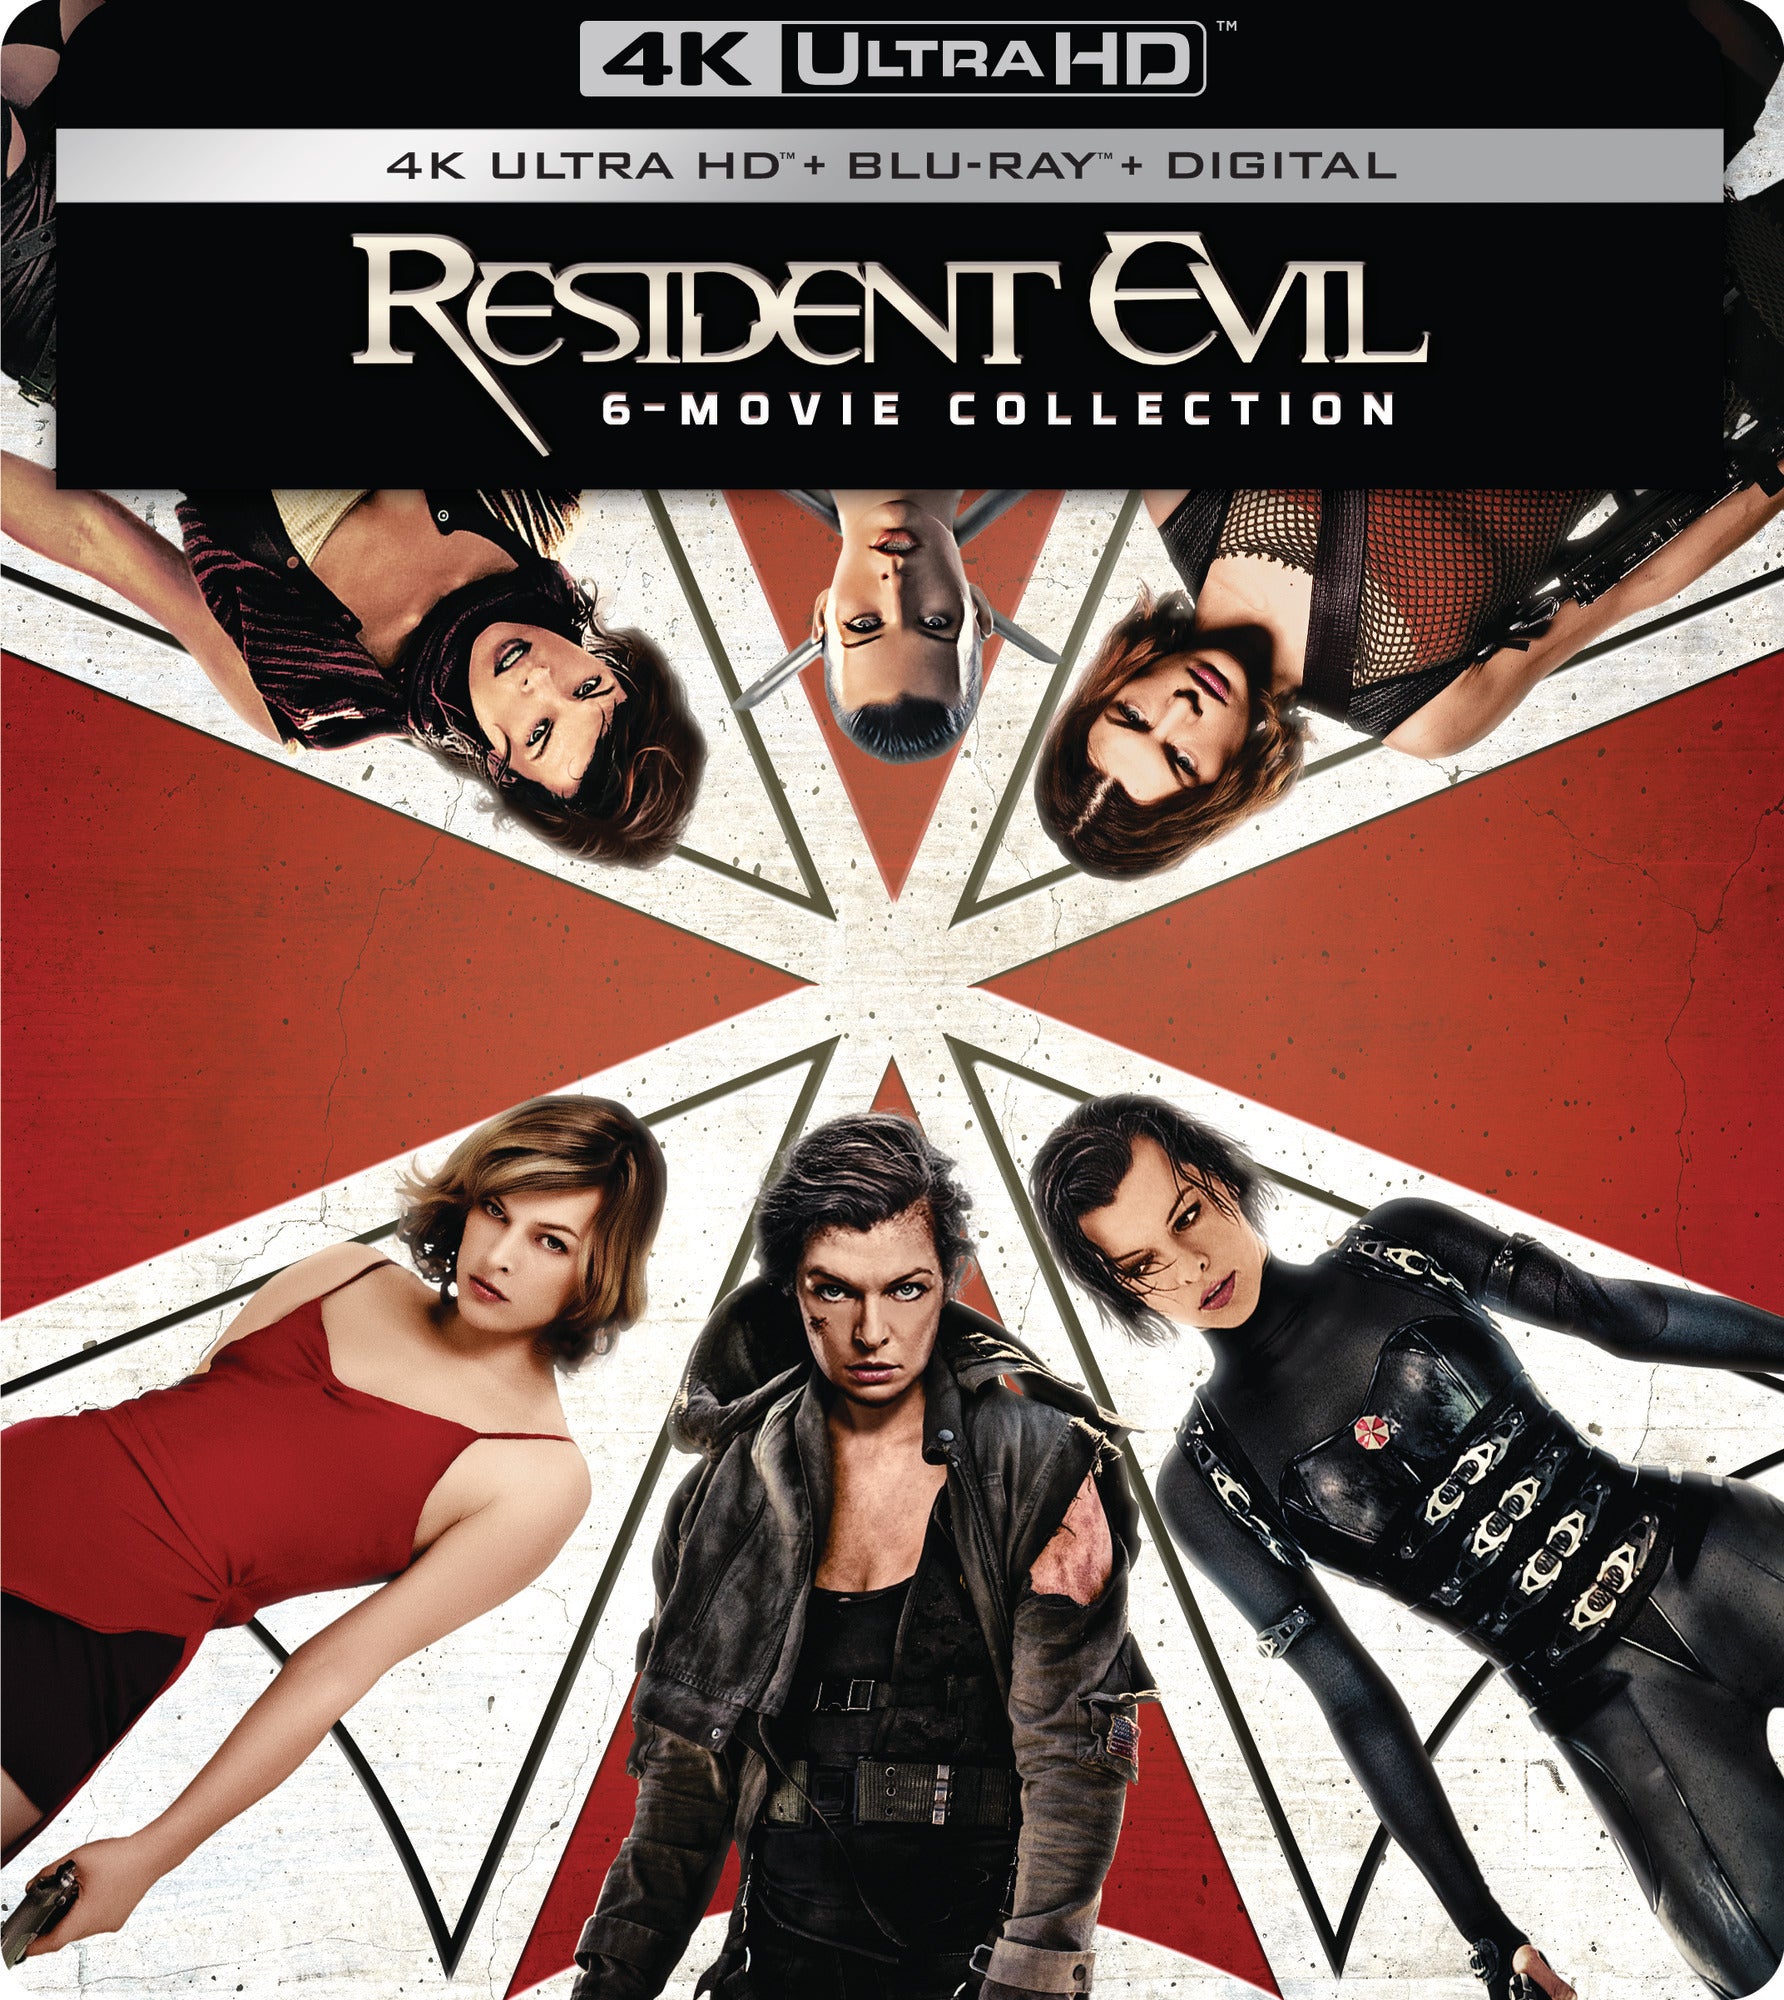 RESIDENT EVIL: THE COMPLETE COLLECTION 4K UHD/BLU-RAY STEELBOOK